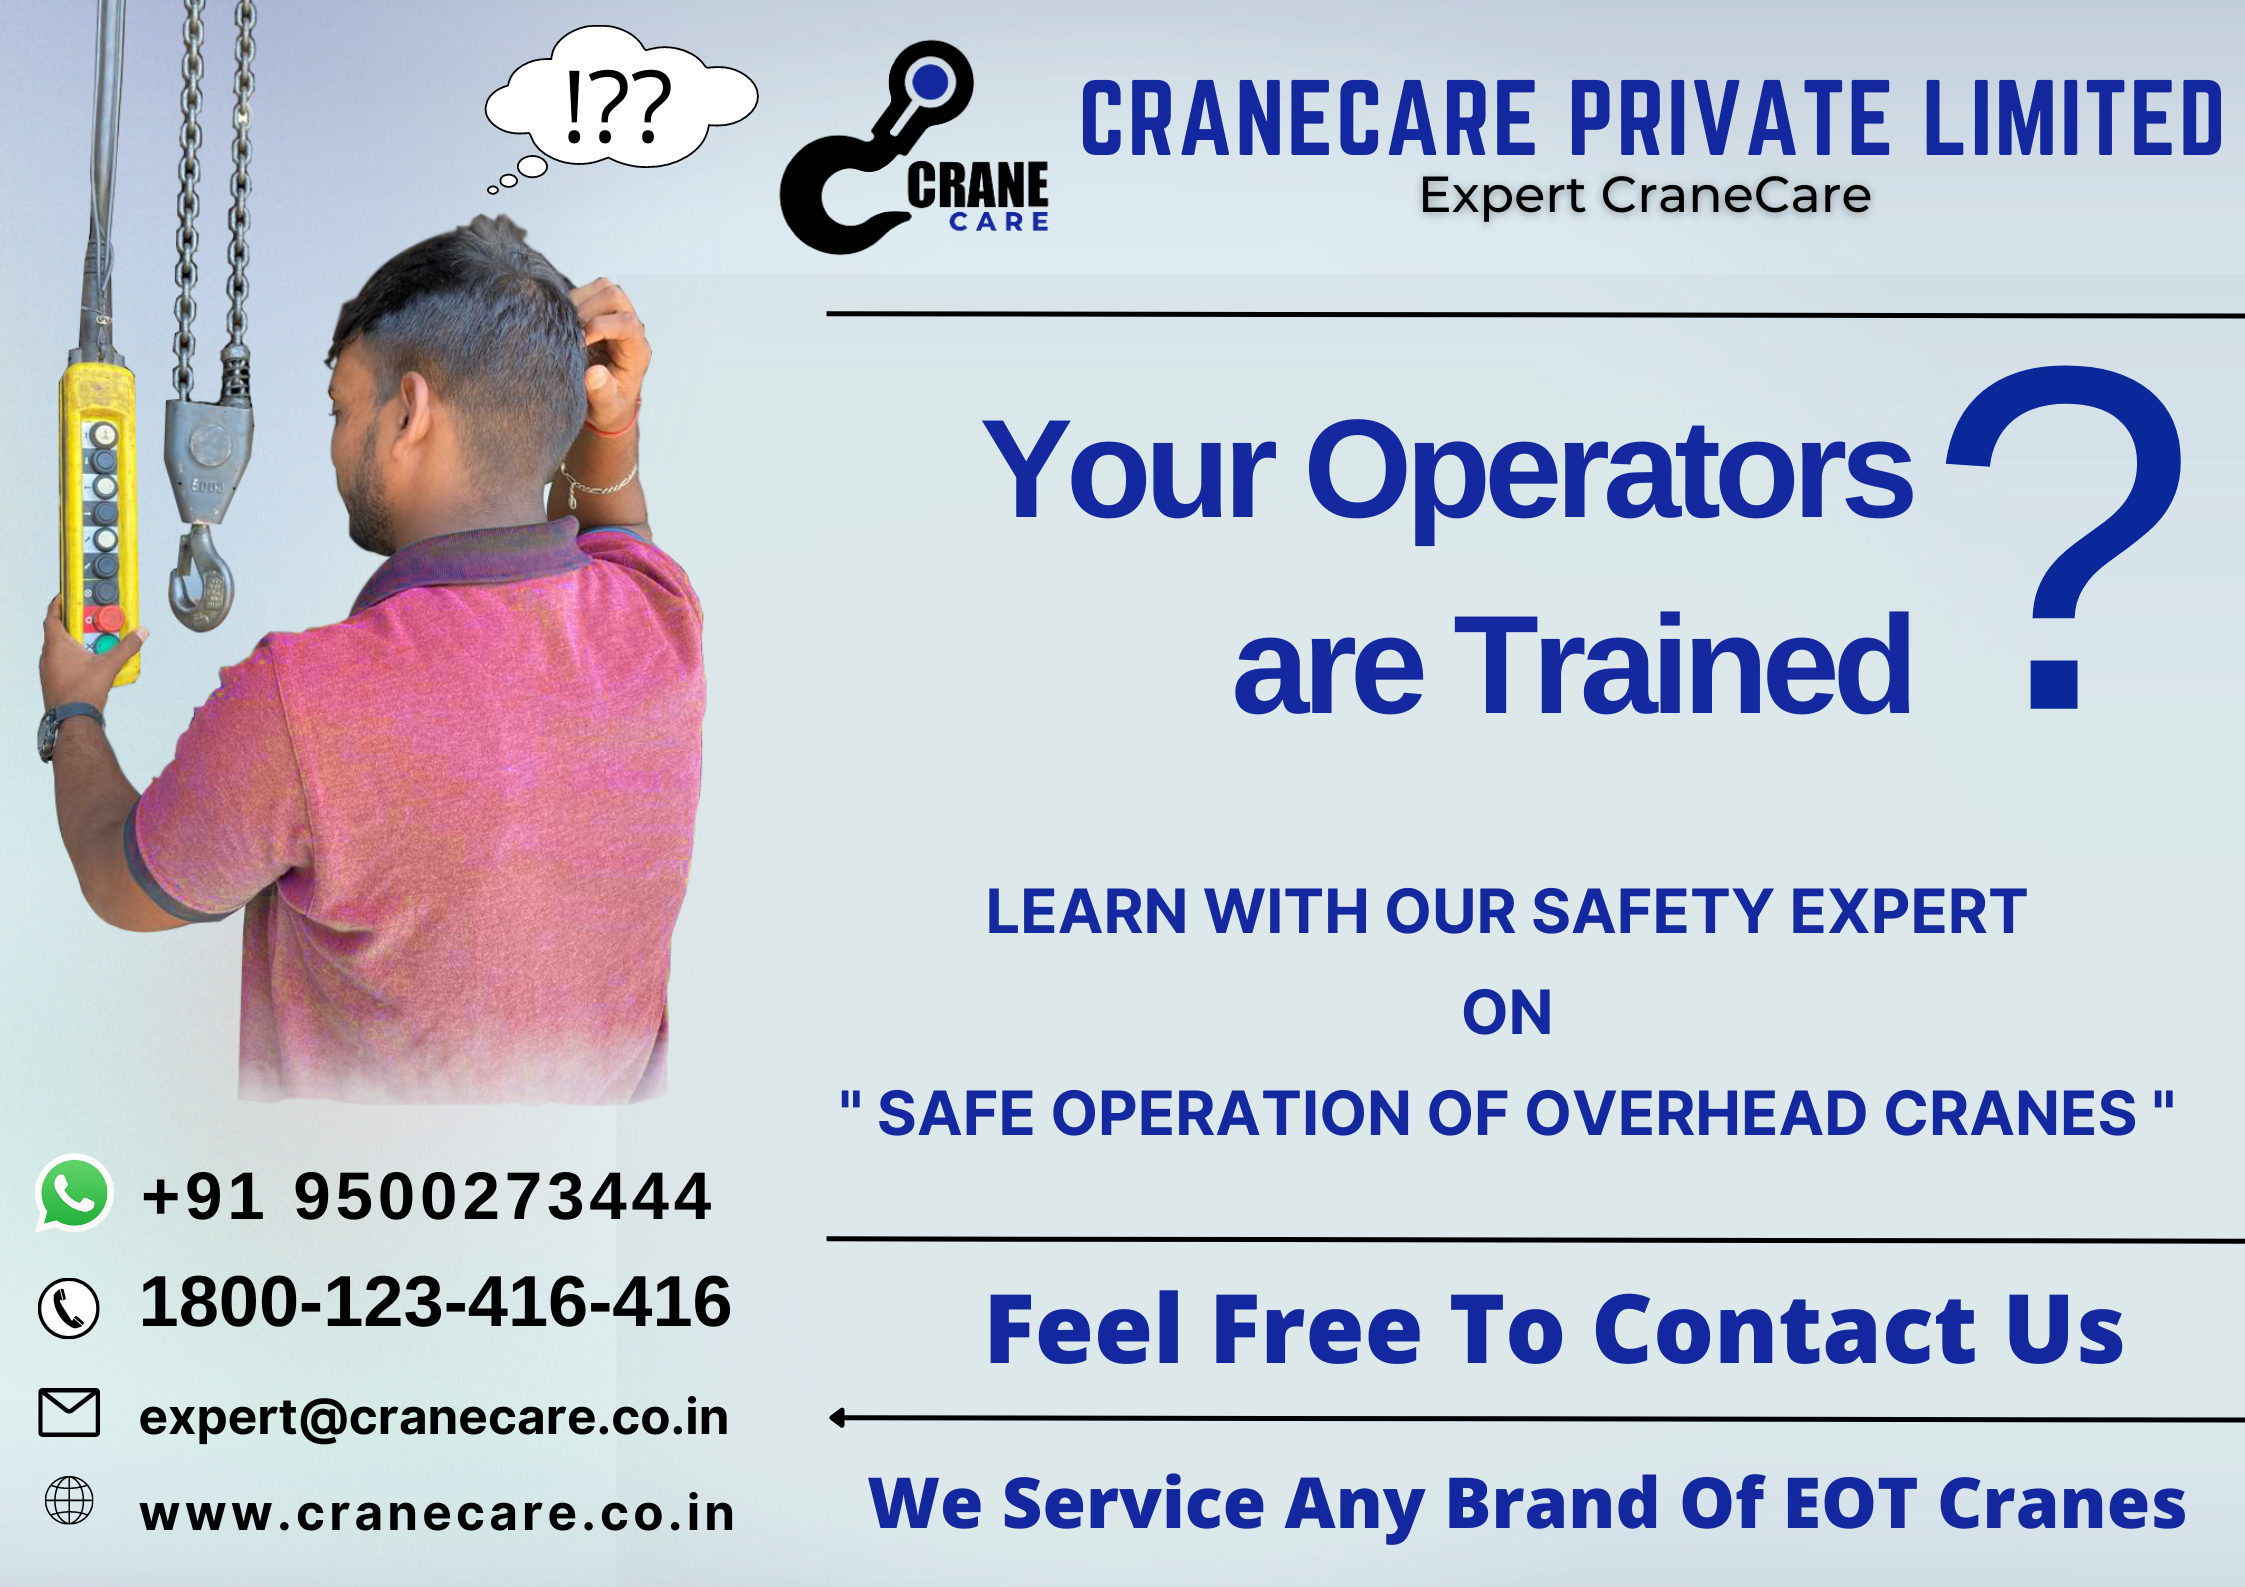 Your Operators are Trained?